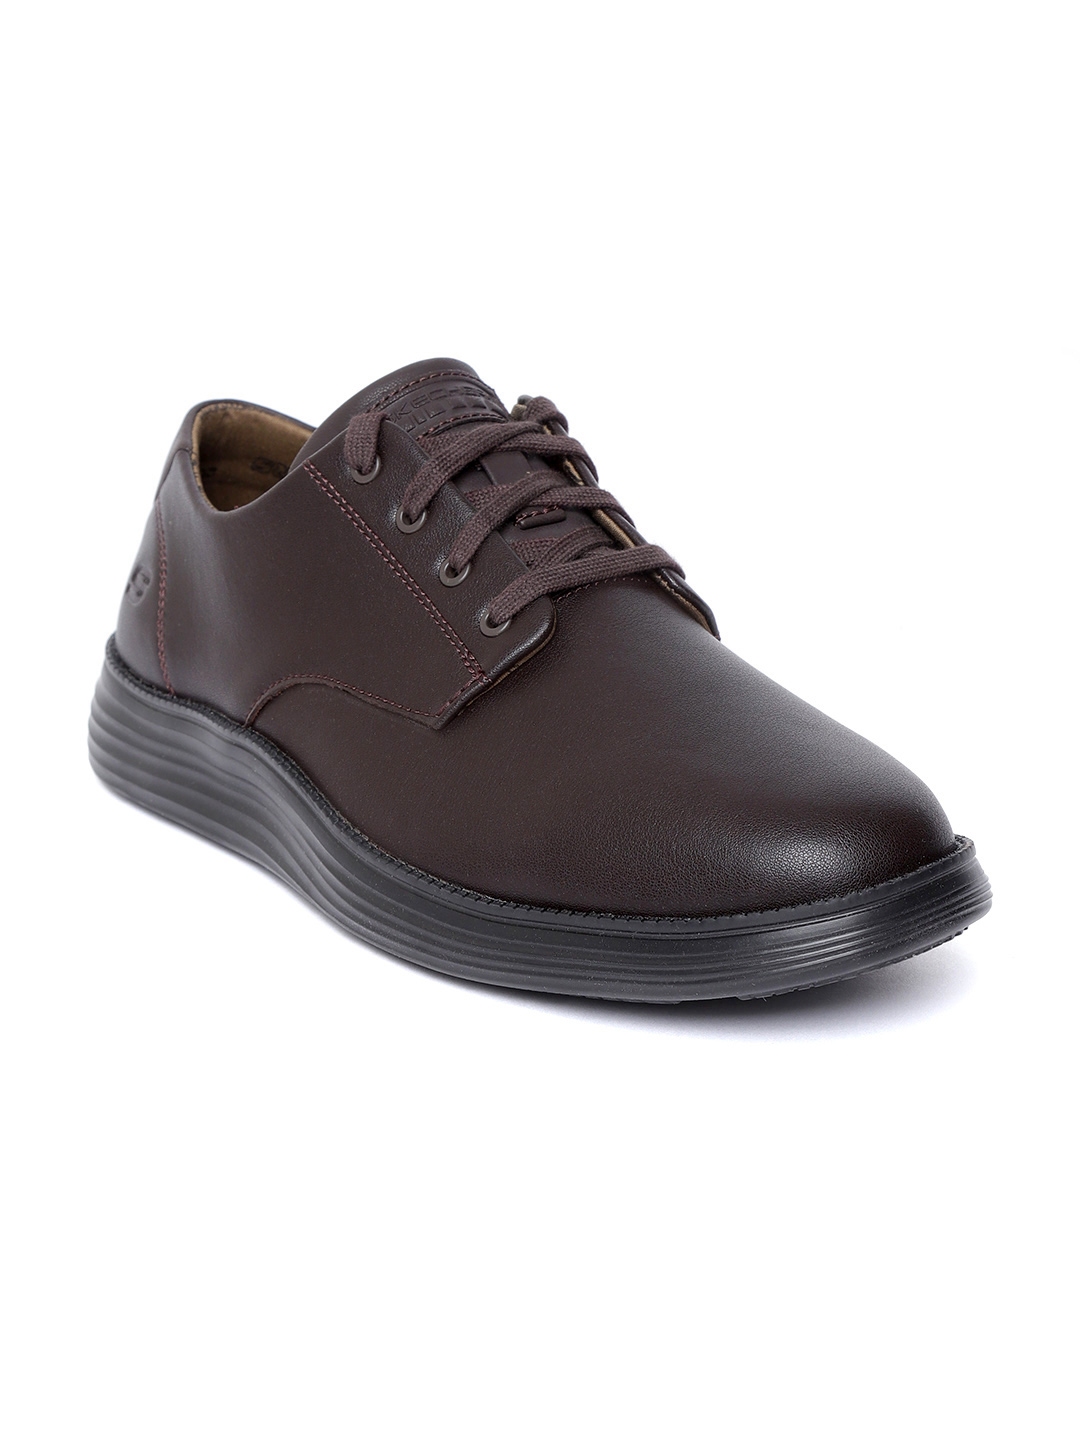 skechers mens leather shoes